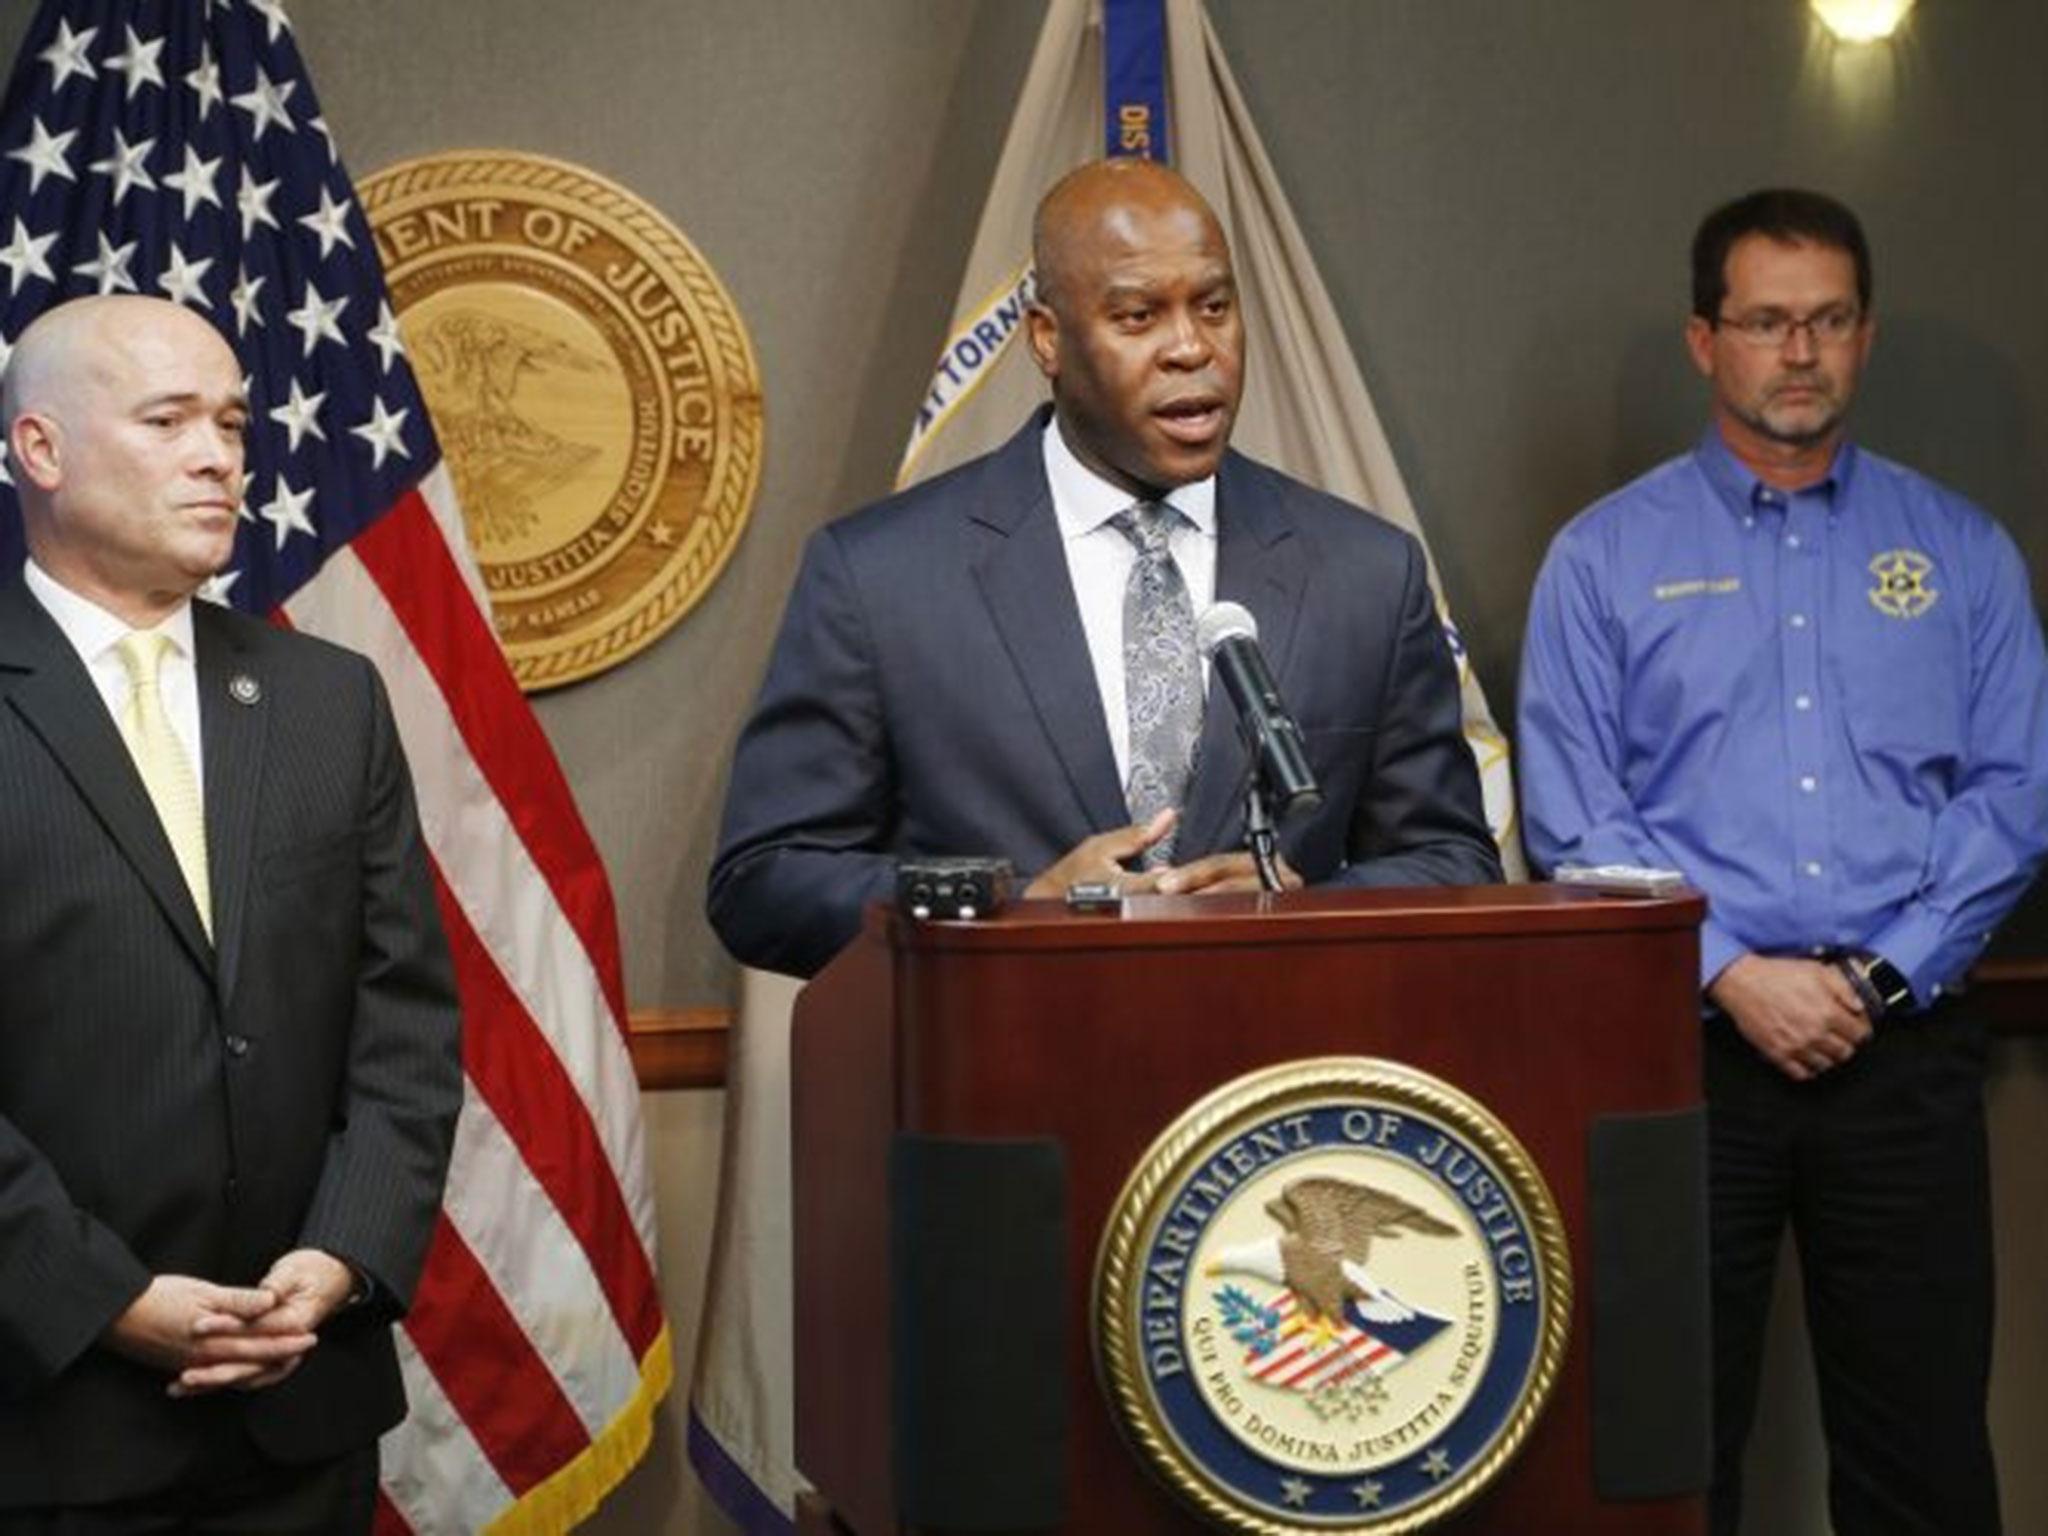 FBI Special Agent Eric Jackson talks about the bureau’s role in stopping the bomb plot